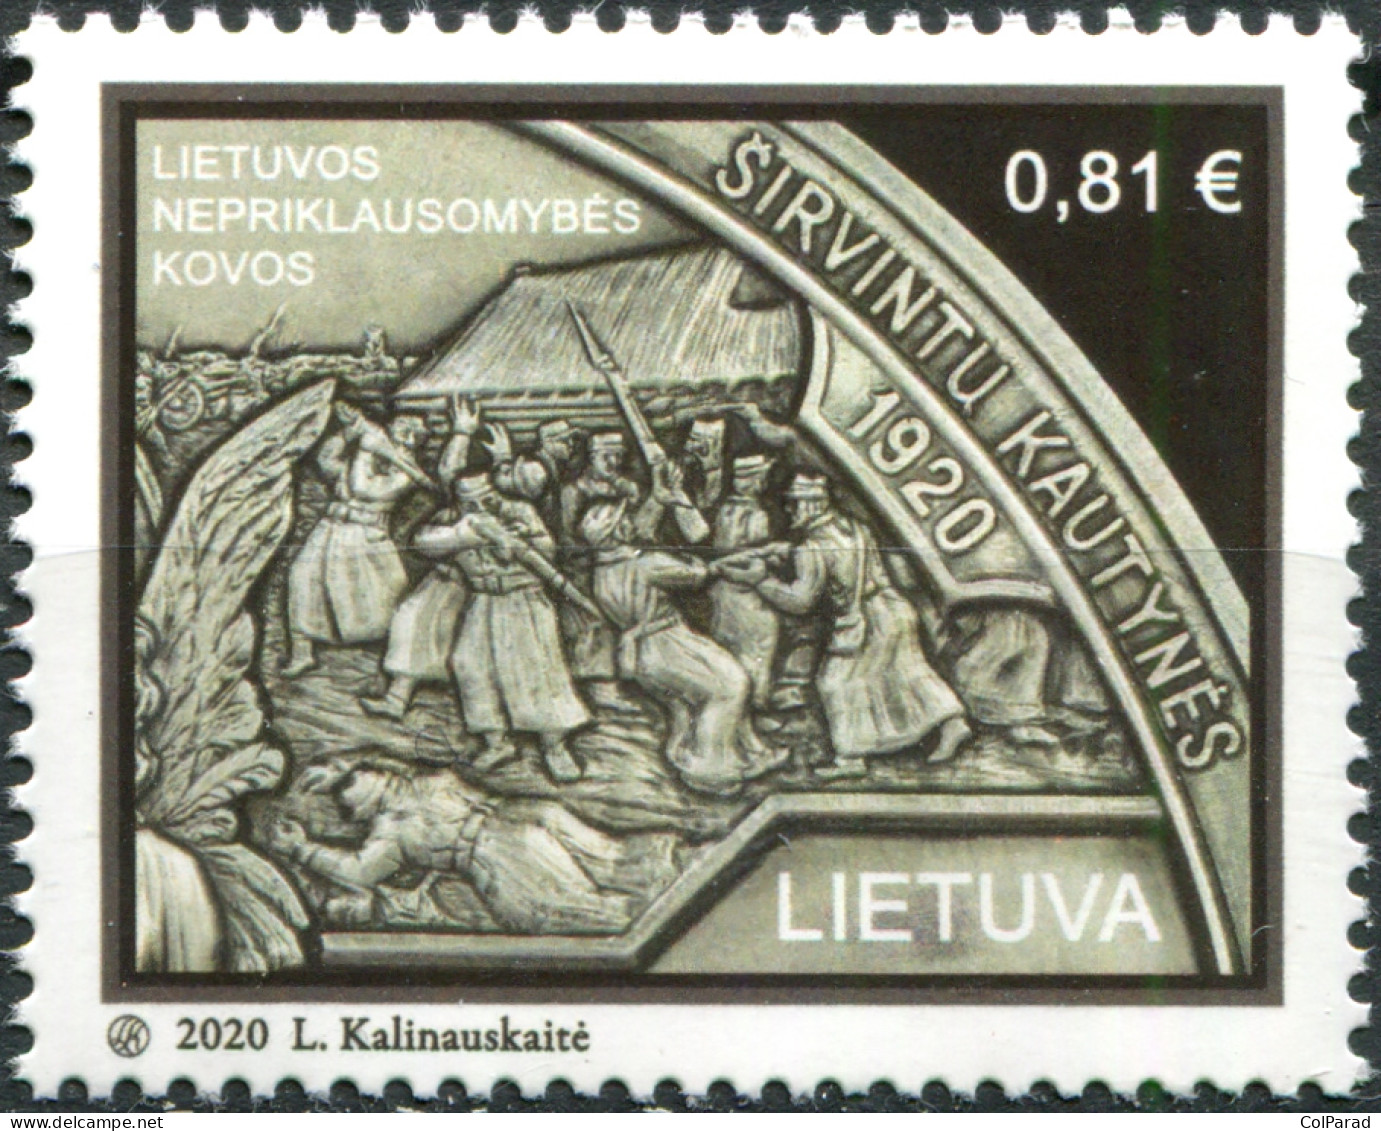 LITHUANIA - 2020 - STAMP MNH ** - Centenary Of Wars Of Independence - Lituania